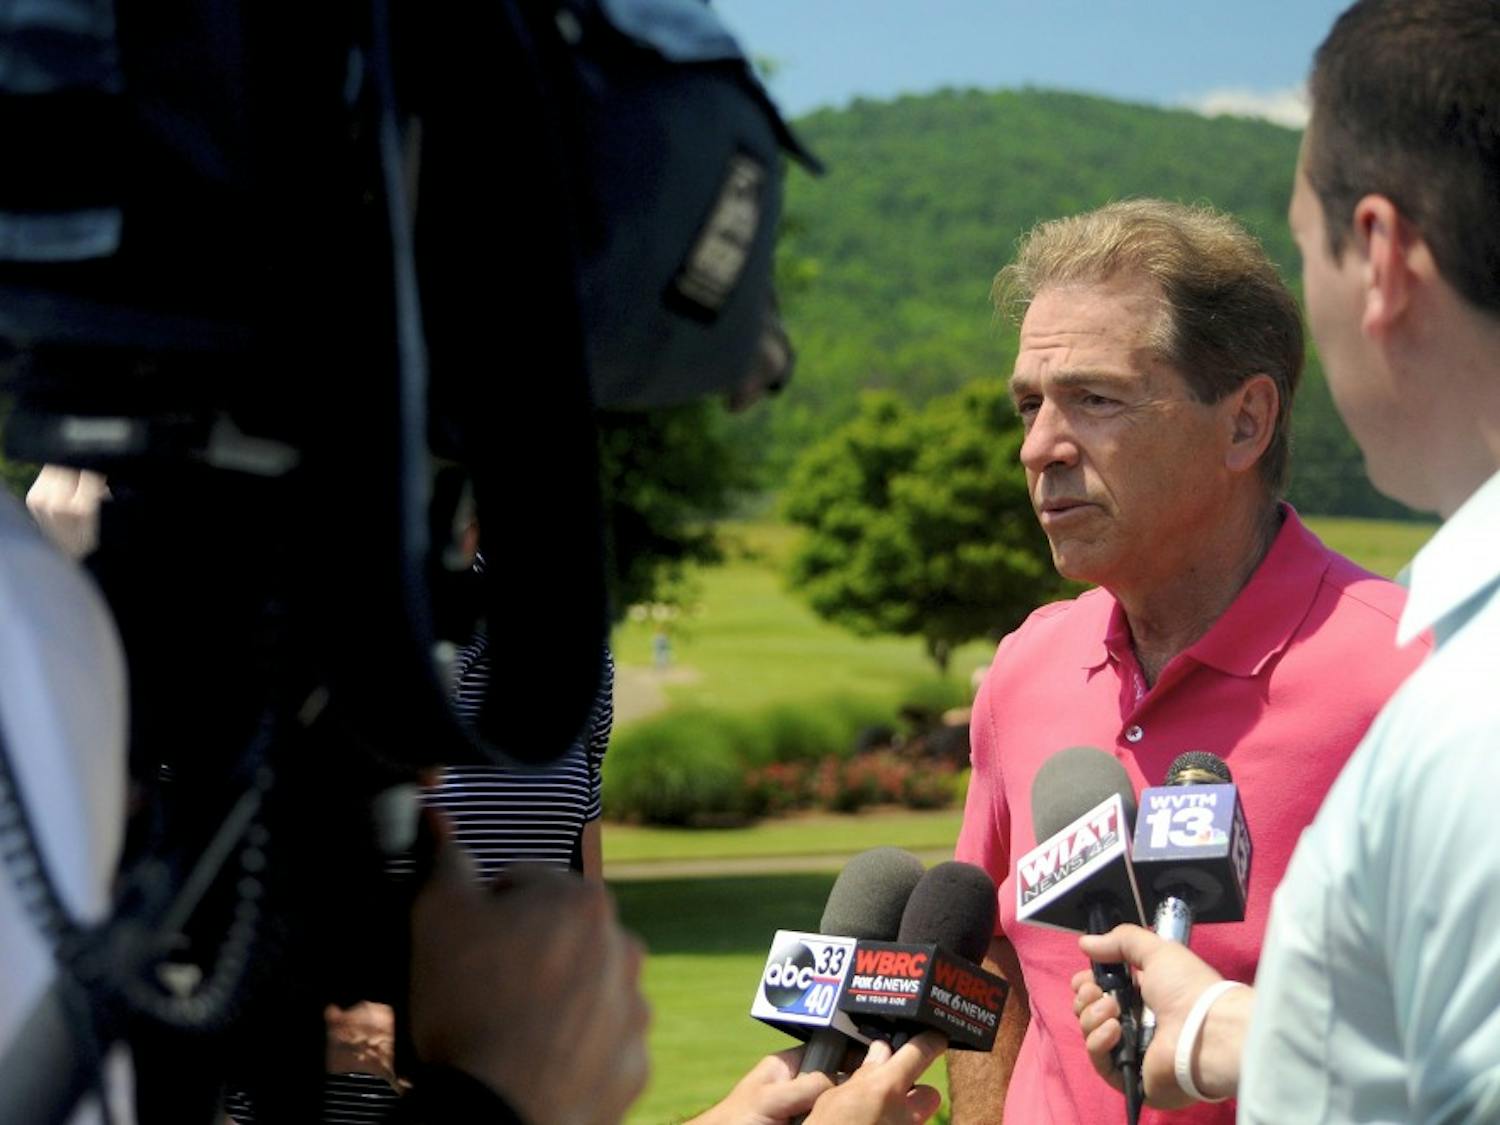 Nick Saban, head football coach at the University of Alabama, is interviewed at Lutzie 43 Invitational Golf Tournament in Sylacauga, Ala. on Tuesday, May 24, 2016.